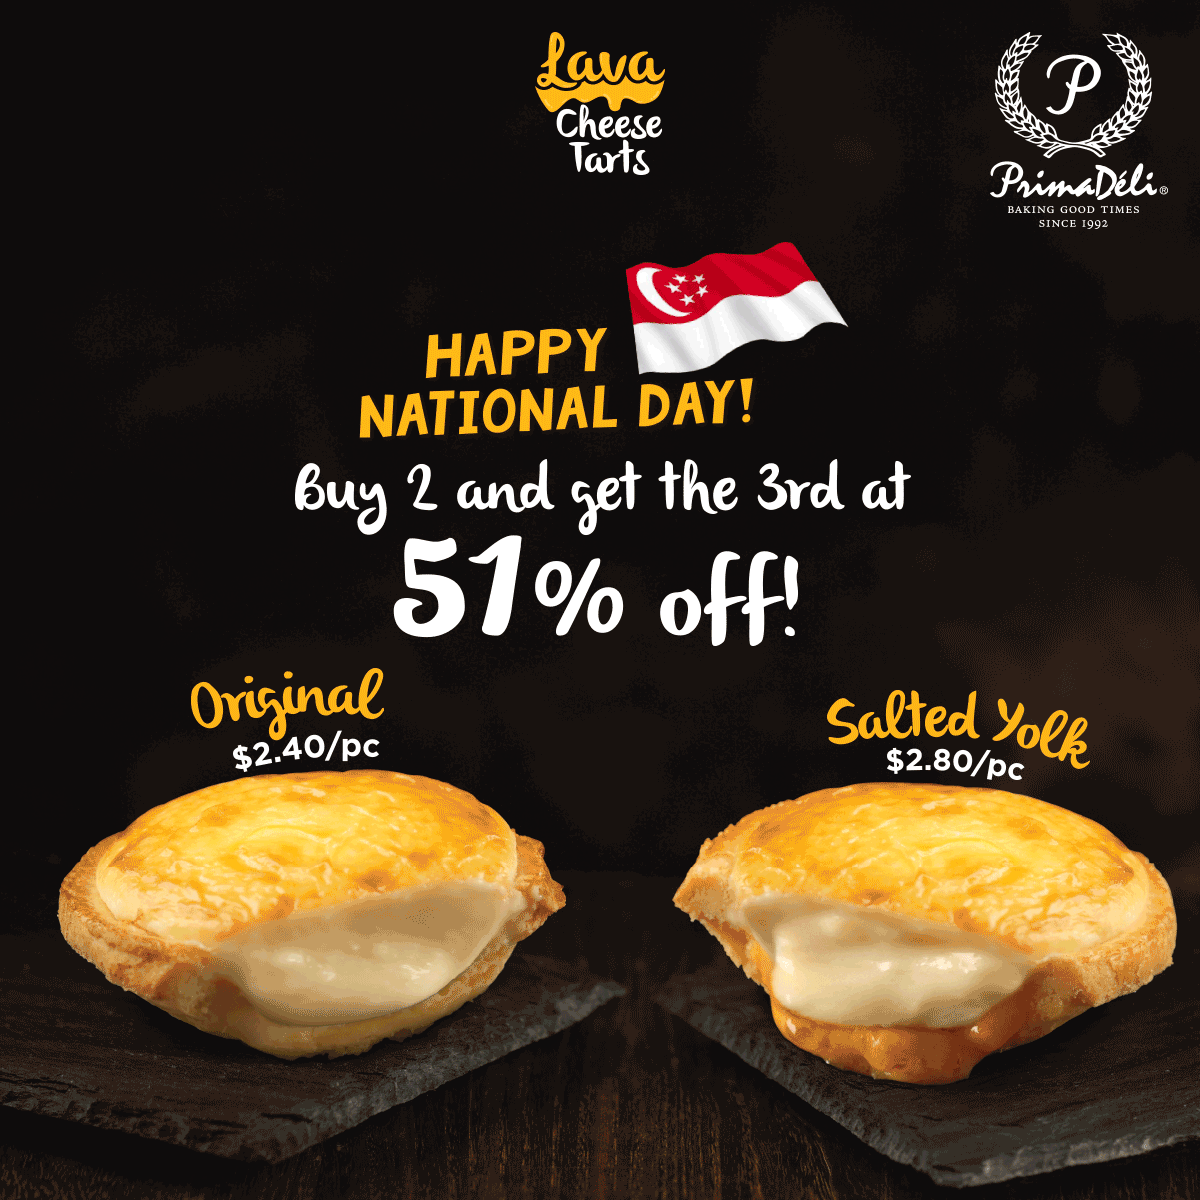 PrimaDeli Lava Cheese Tarts Singapore National Day Promotion ends 21 Aug 2016